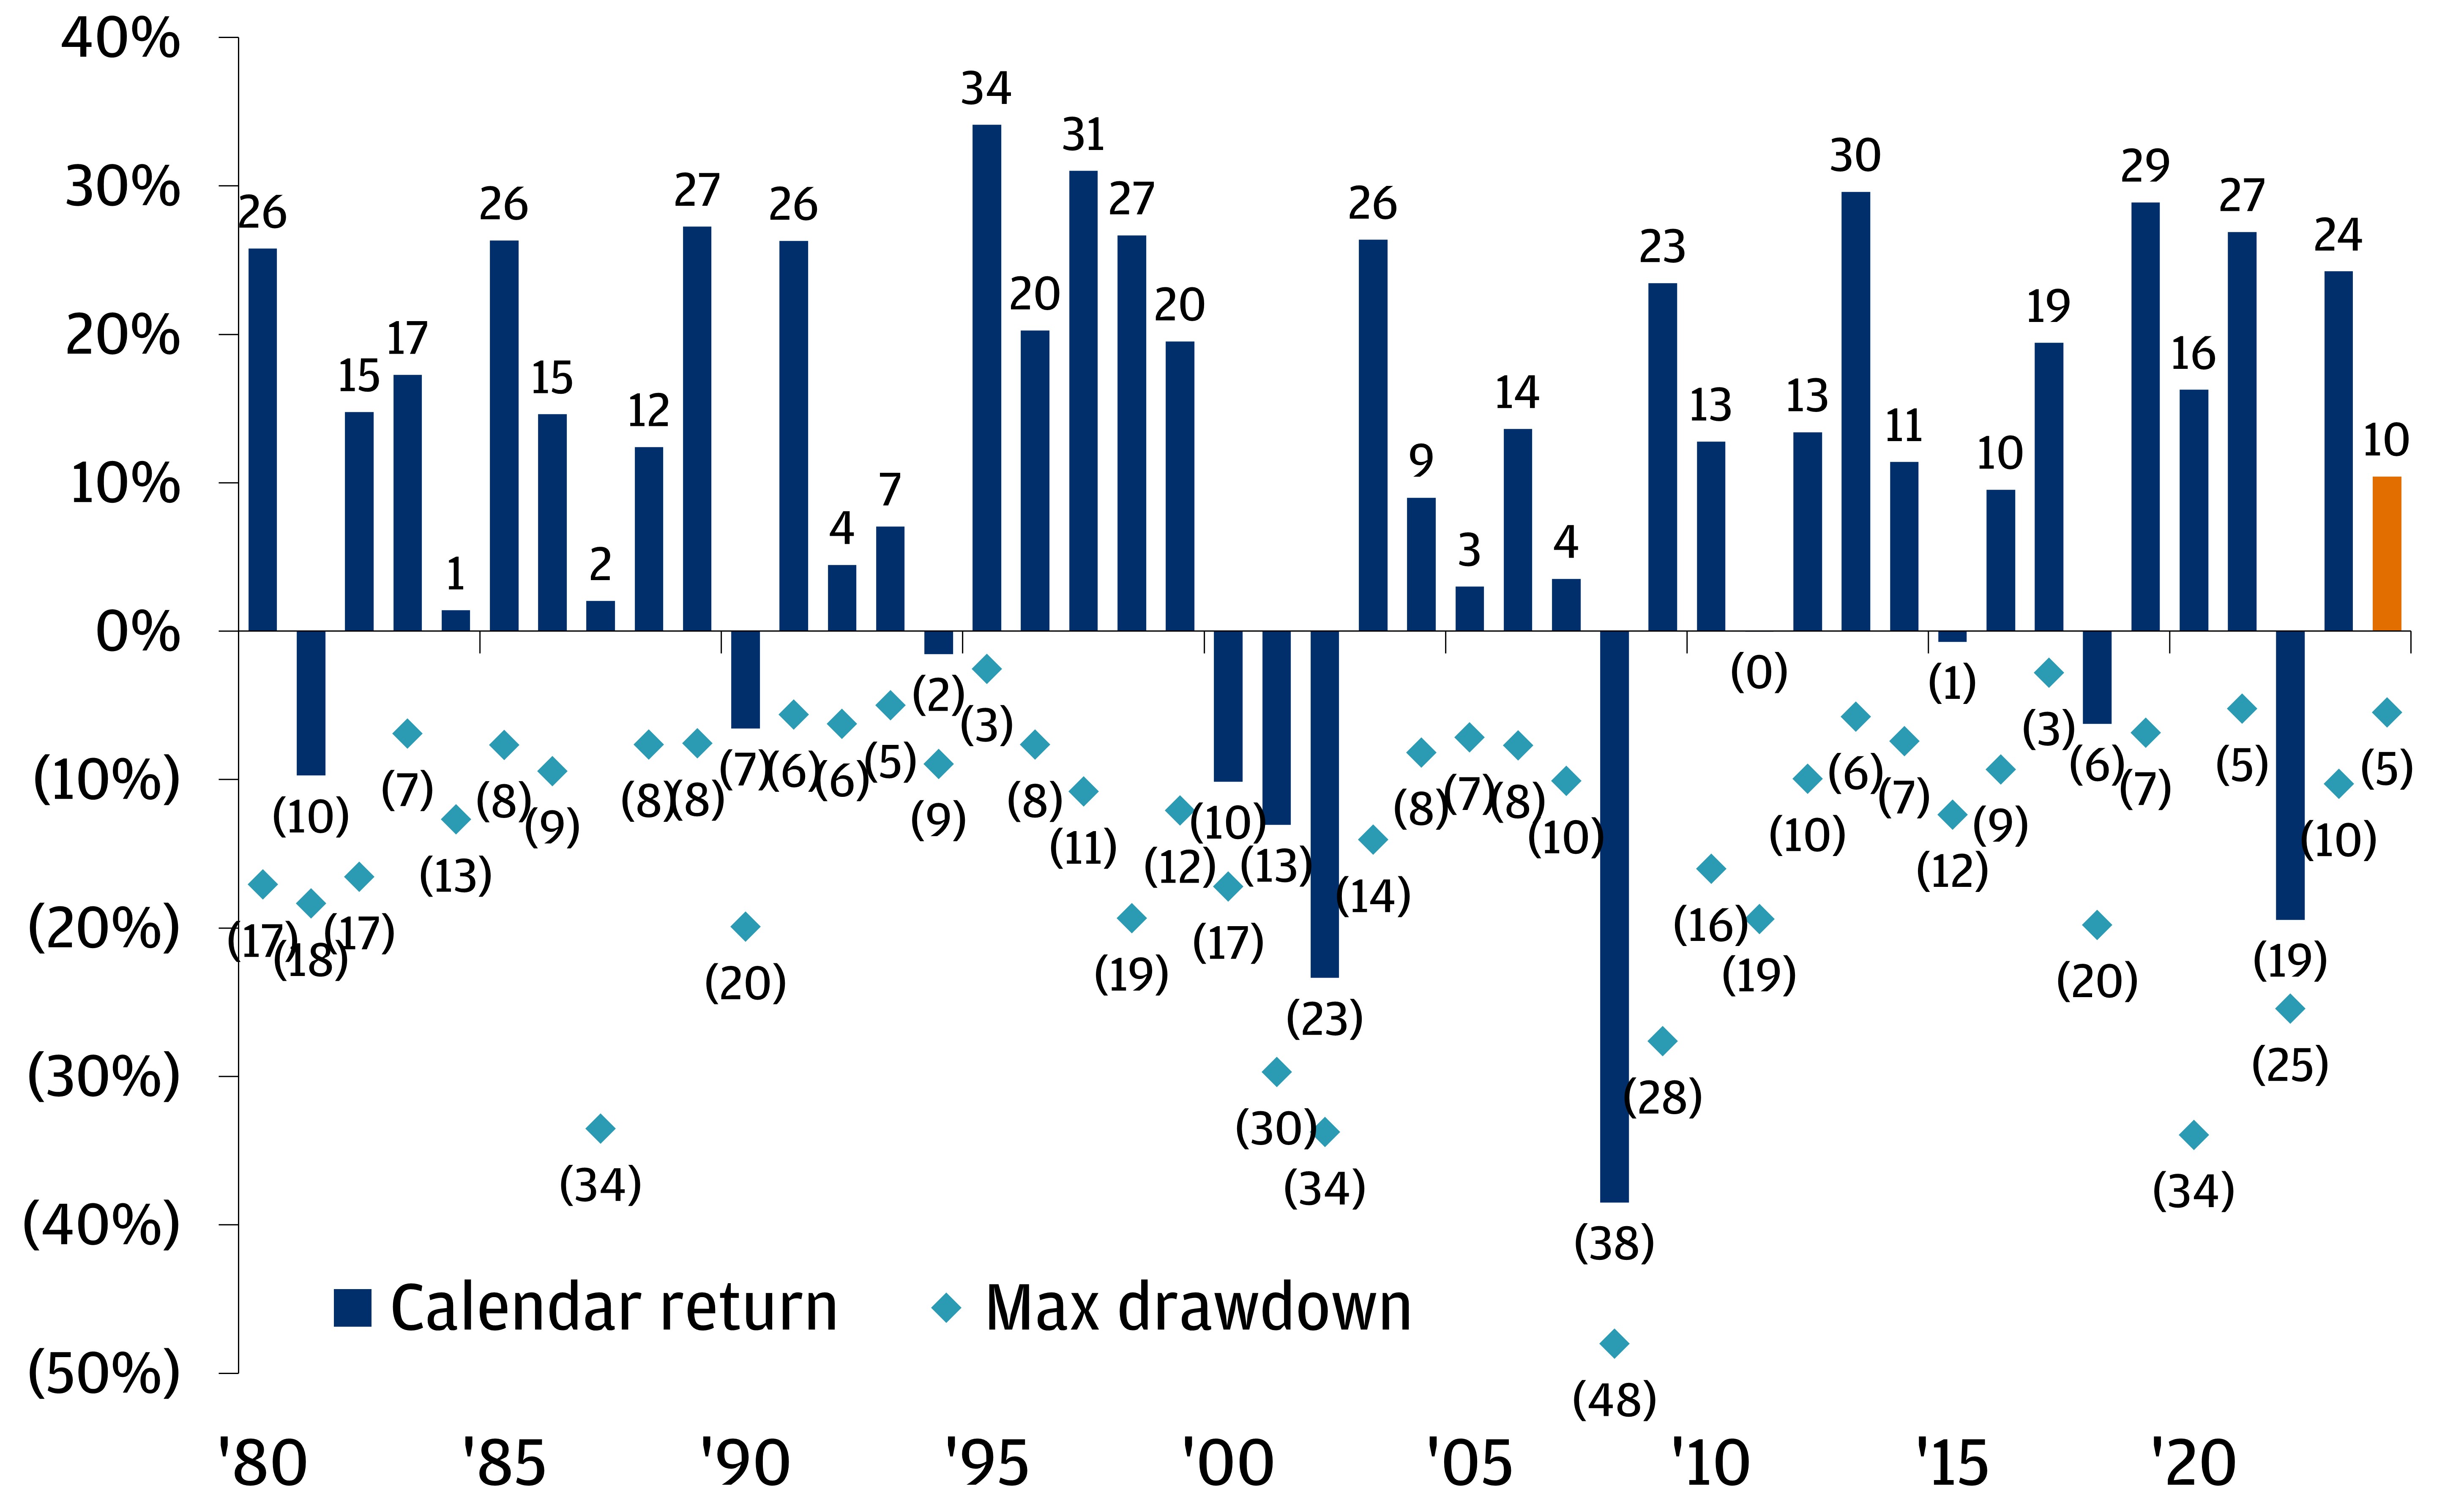 The chart describes S&P 500 Index intra-year declines (max drawdowns) and calendar-year price returns in bars and dots.